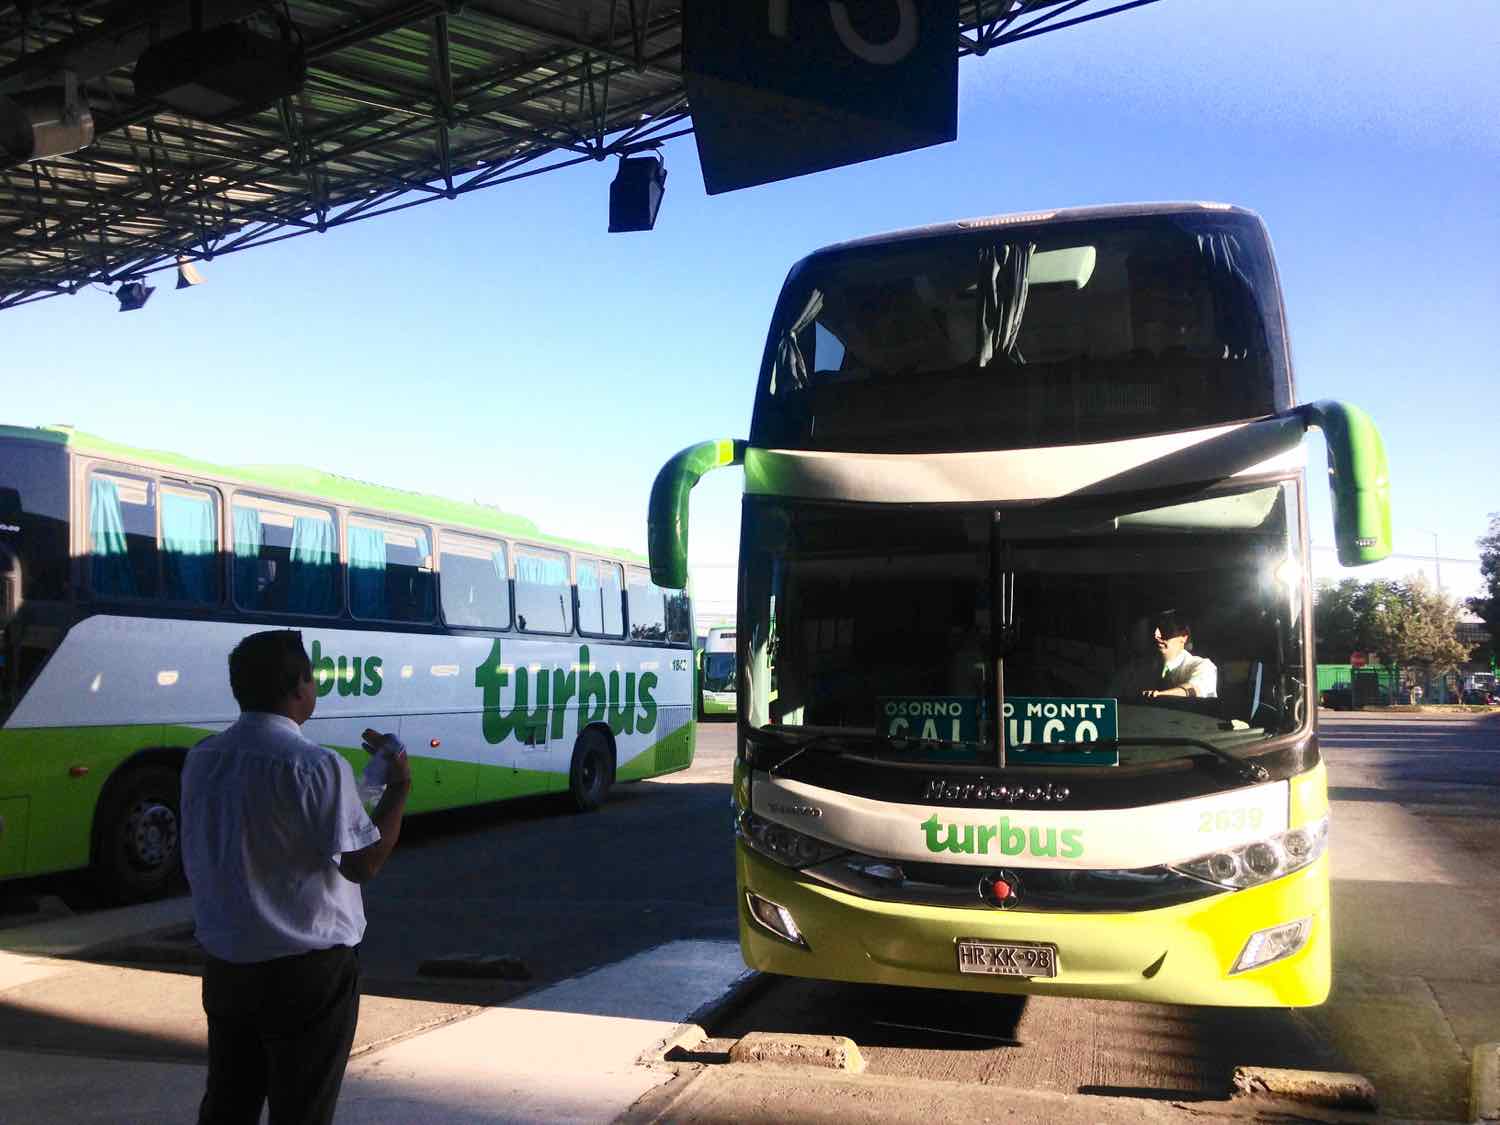 Turbus Chile - one of the main buses in Chile